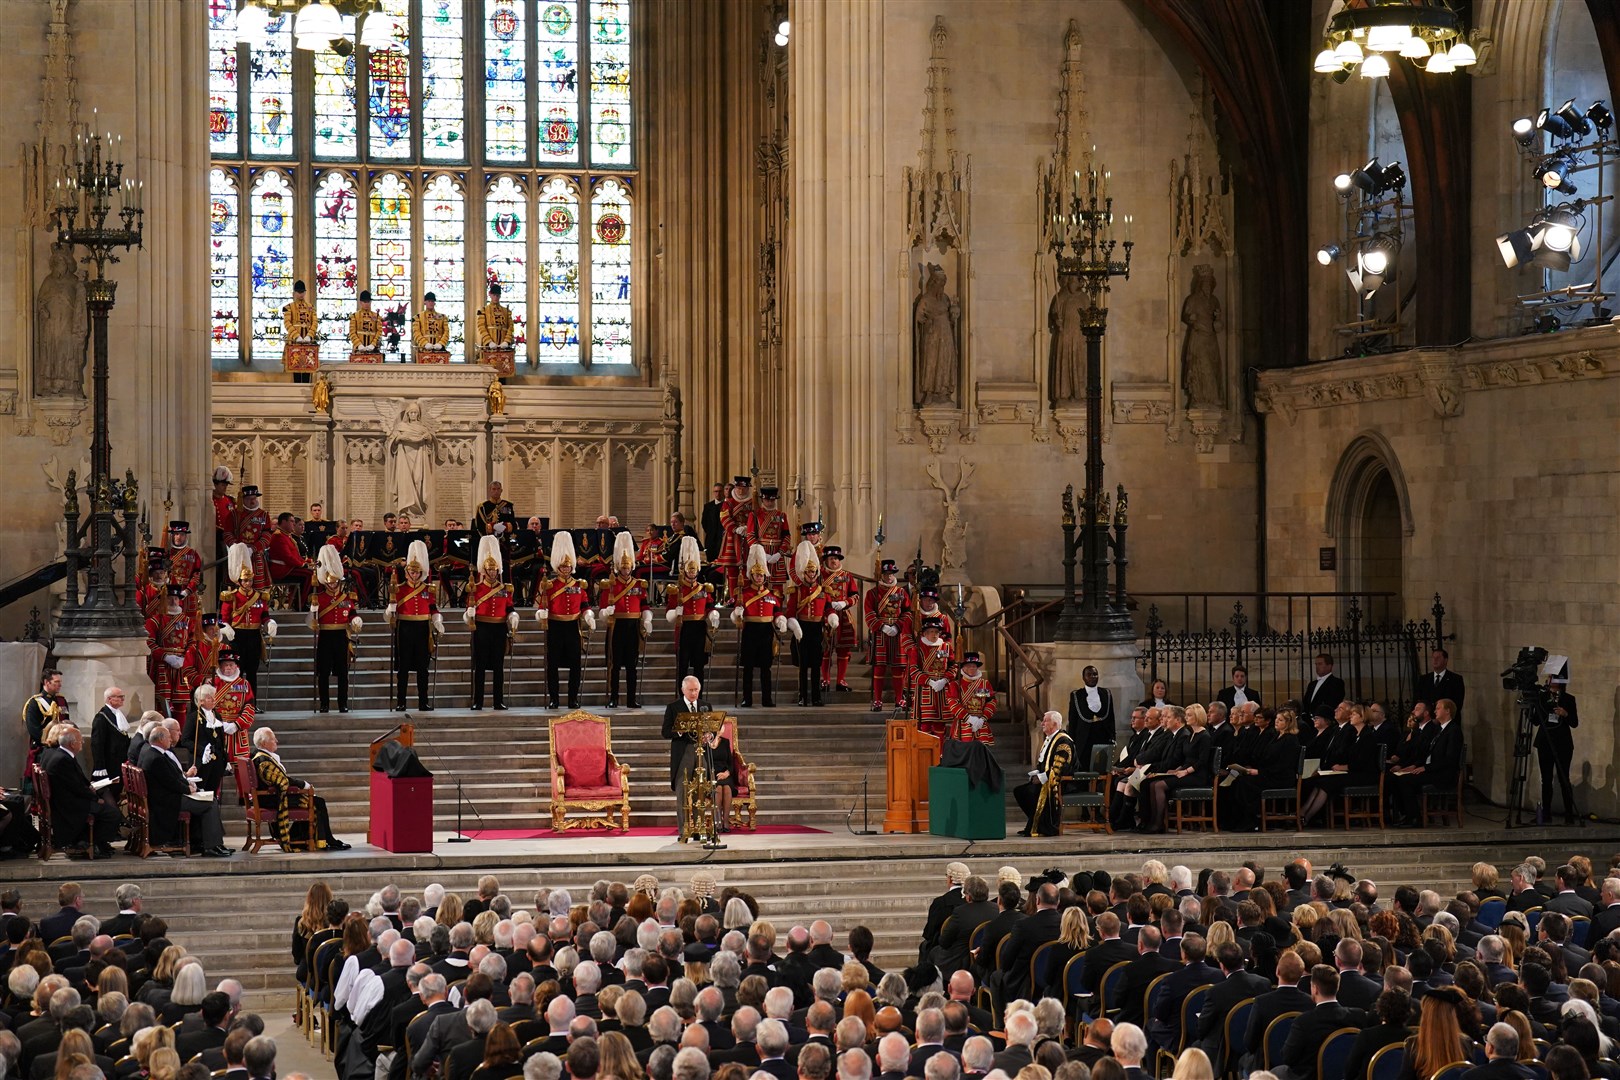 King Charles III gives his address thanking the members of the House of Lords and the House of Commons for their condolences at Westminster Hall, London (Joe Giddens/PA)